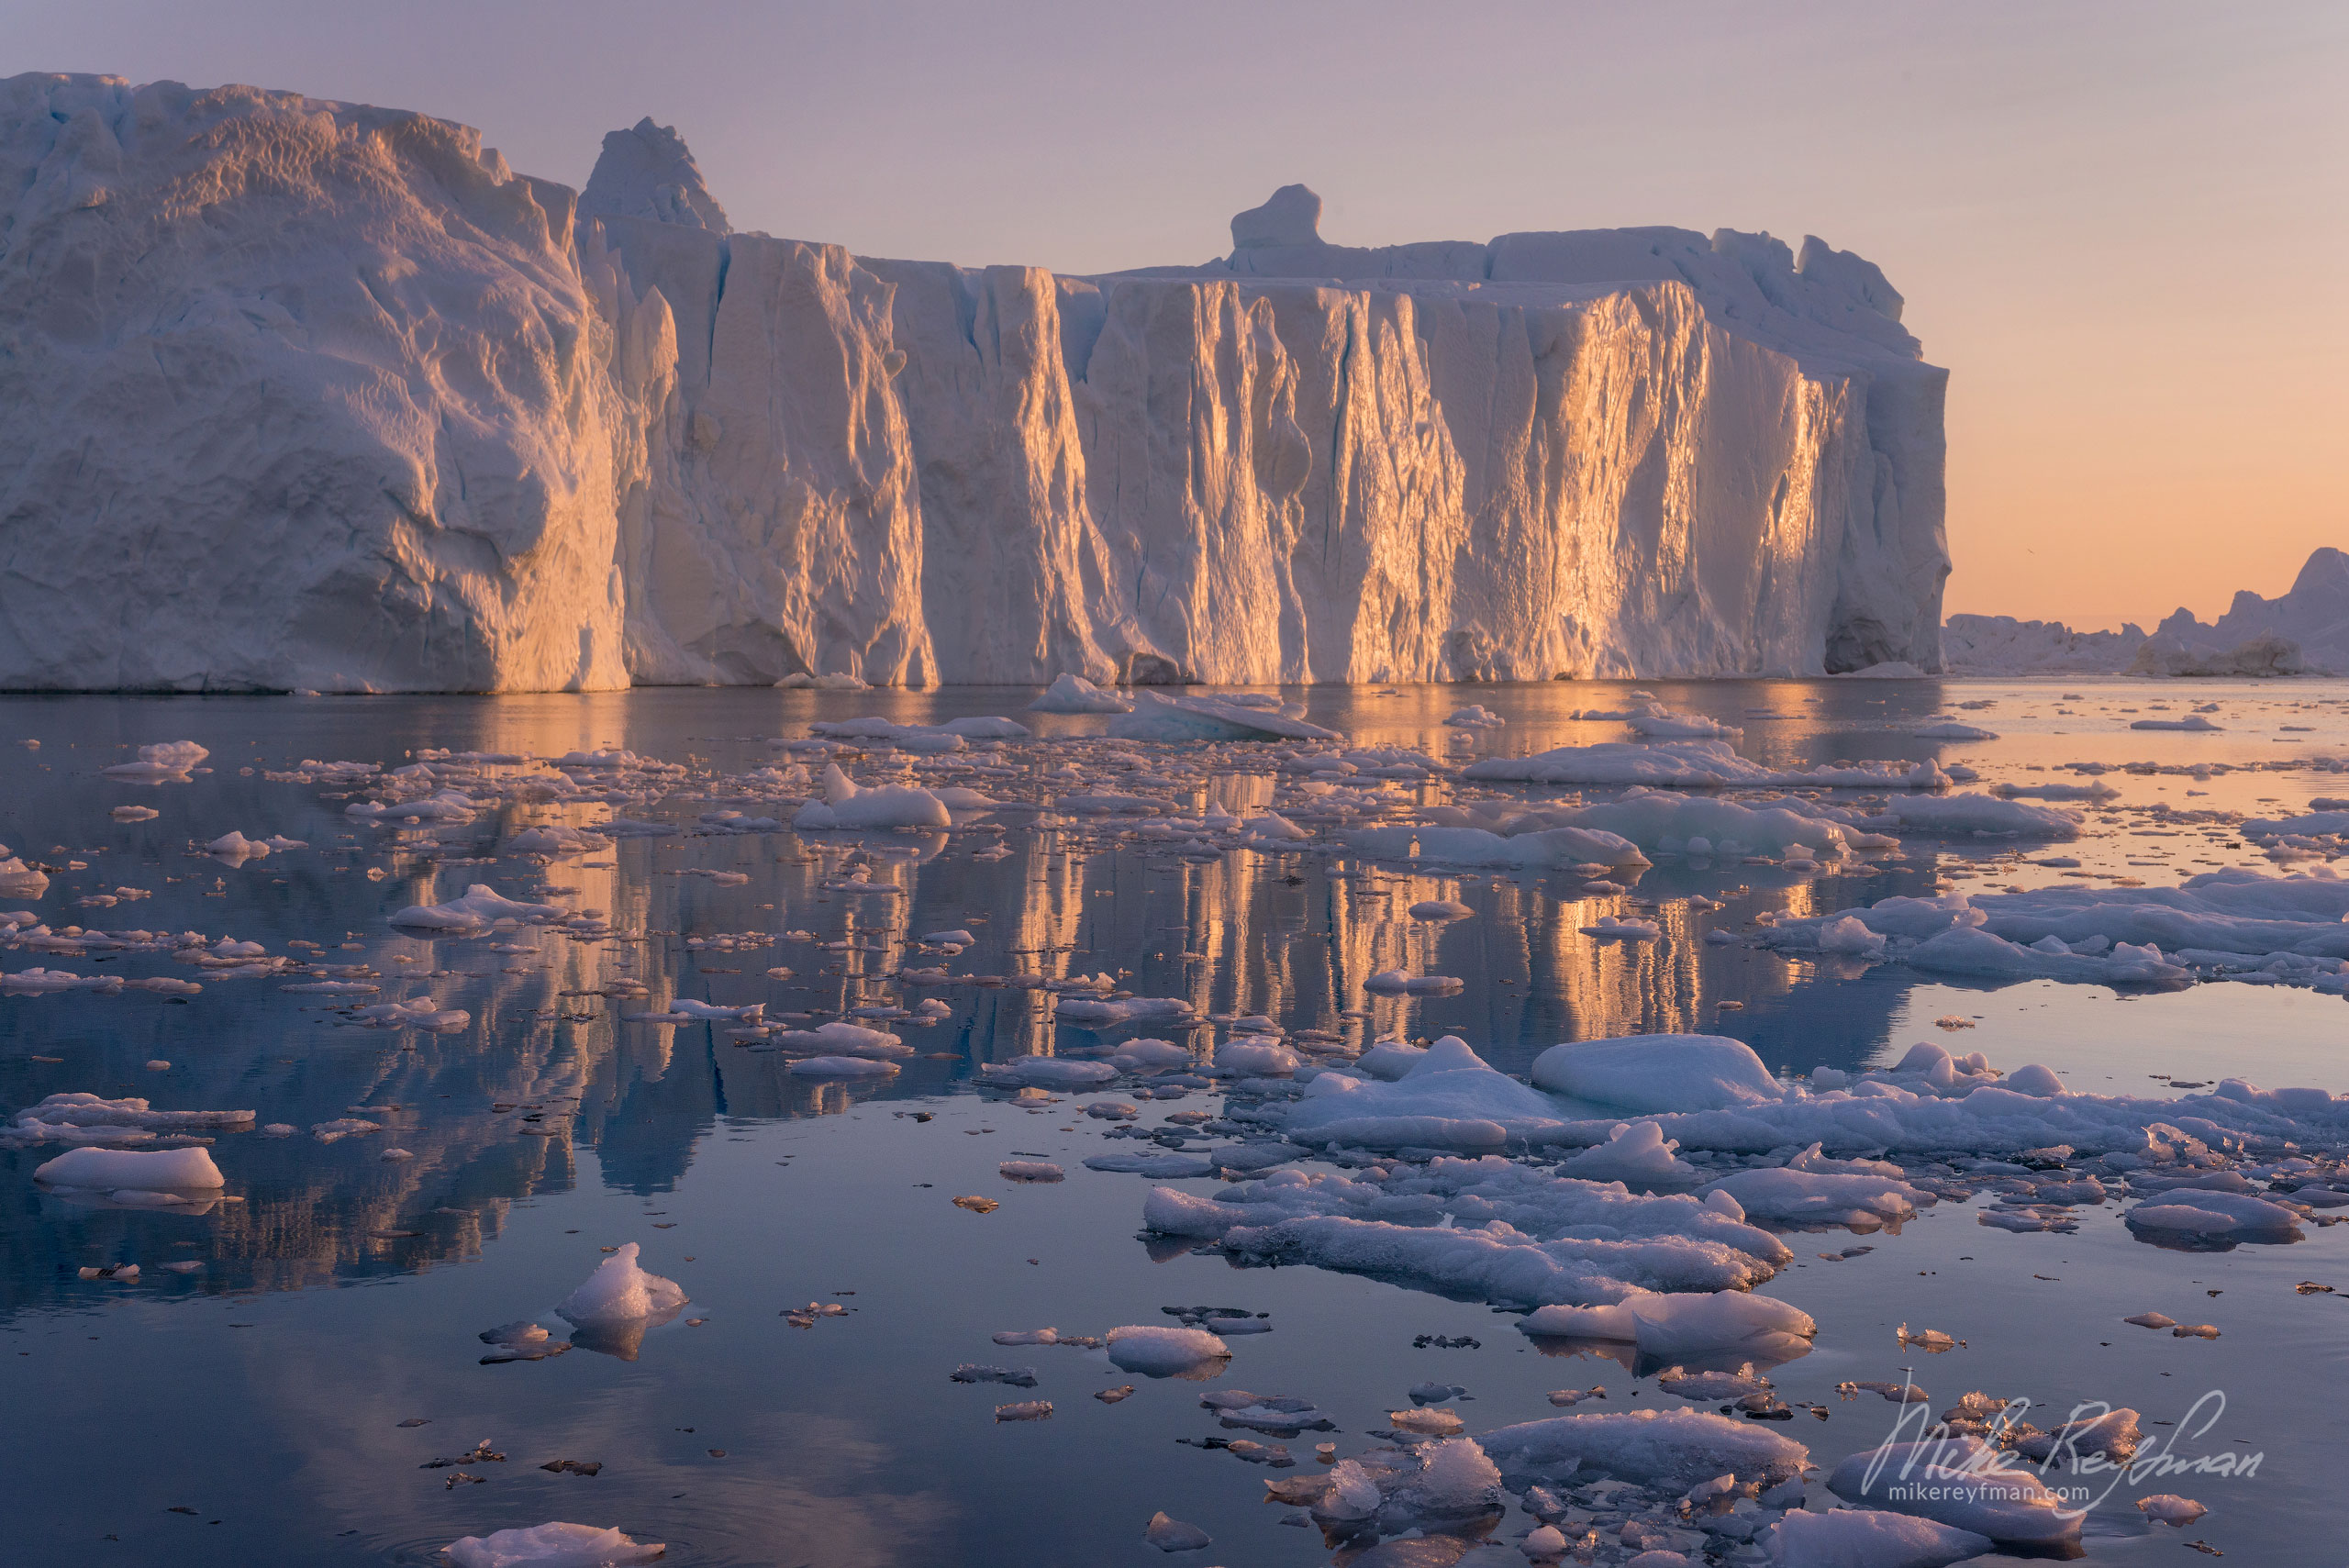 Icebergs in Ilulissat Icefjord. Disco Bay, Greenland. 018-GR-IL_D8B5117 - Enormous icebergs of Ilulissat Icefjord and Disco Bay. Western Greenland. - Mike Reyfman Photography